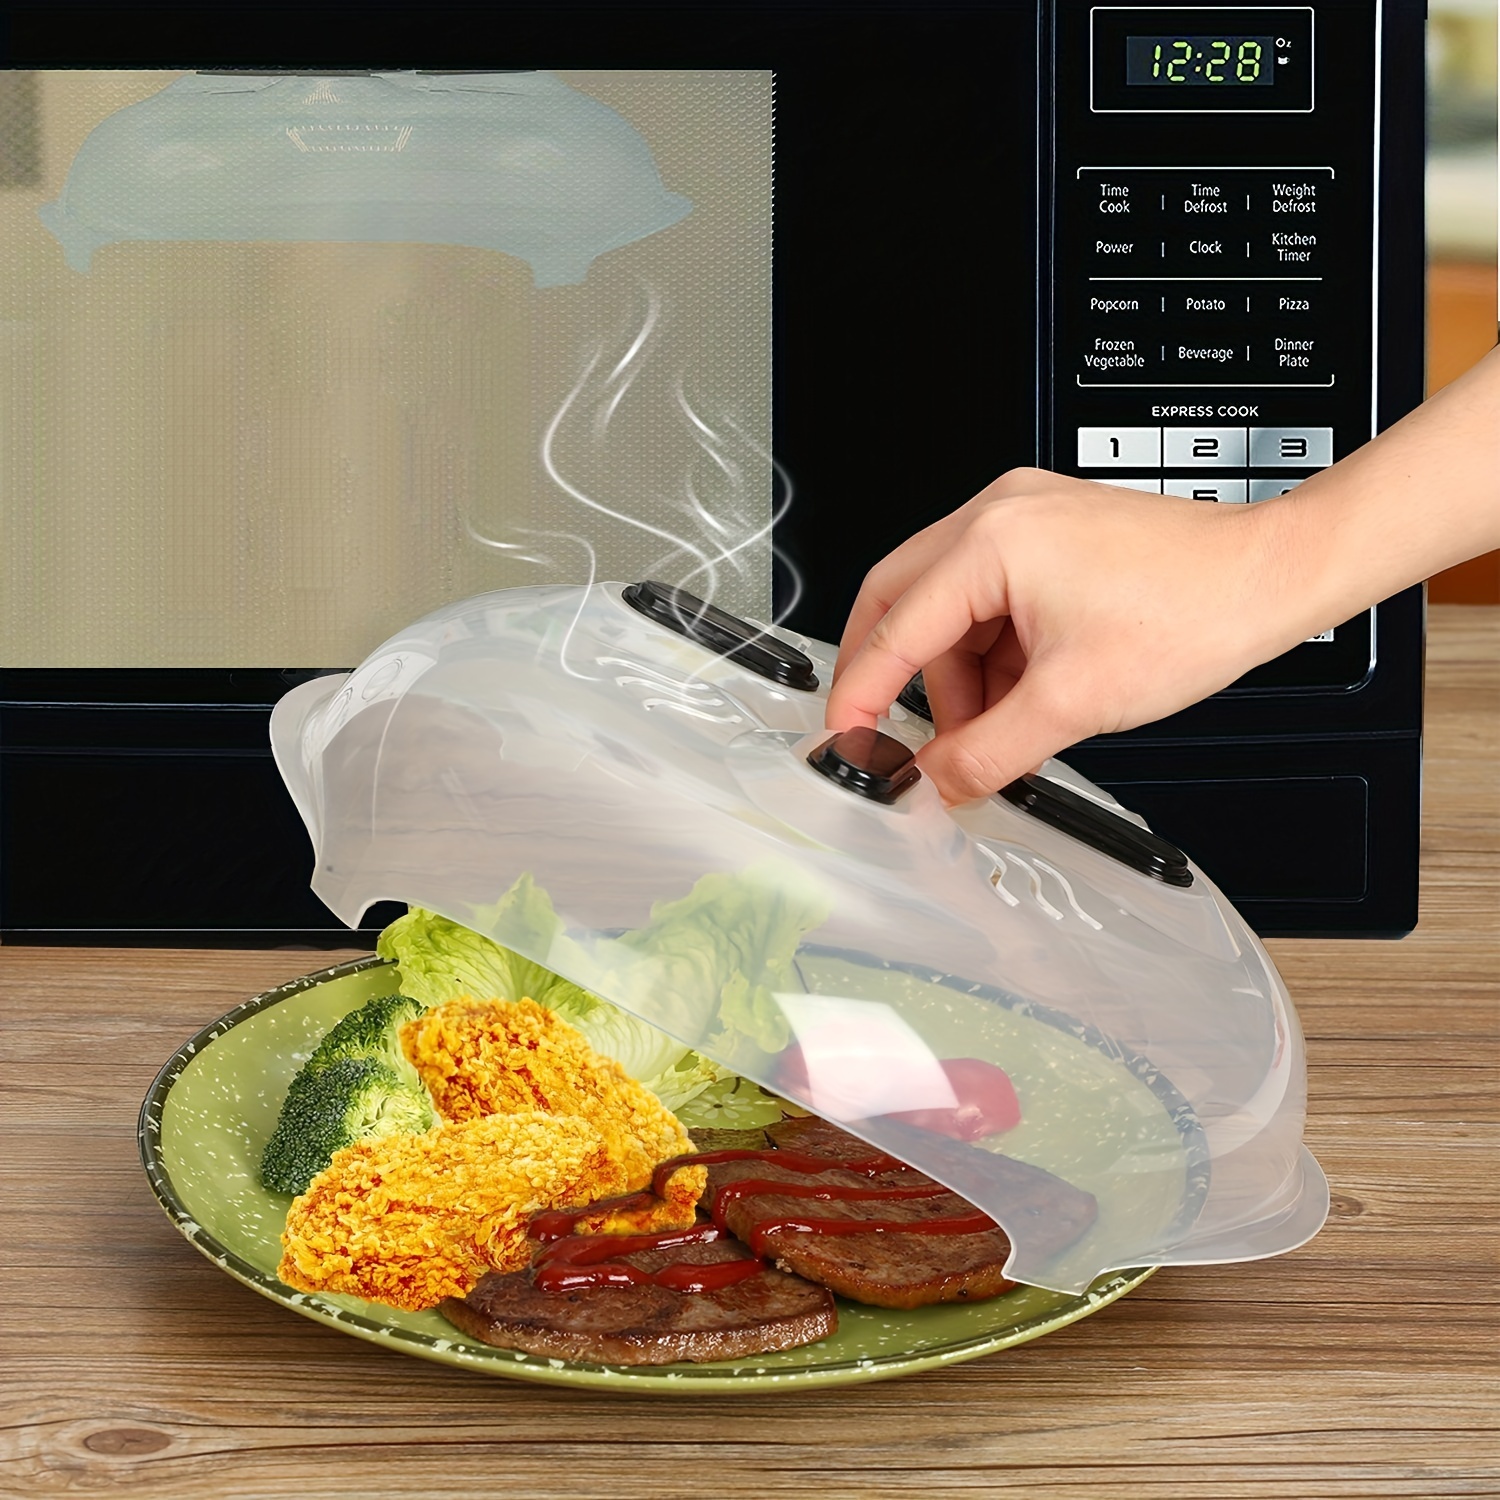  Microwave Splatter Cover, Microwave Cover for Food